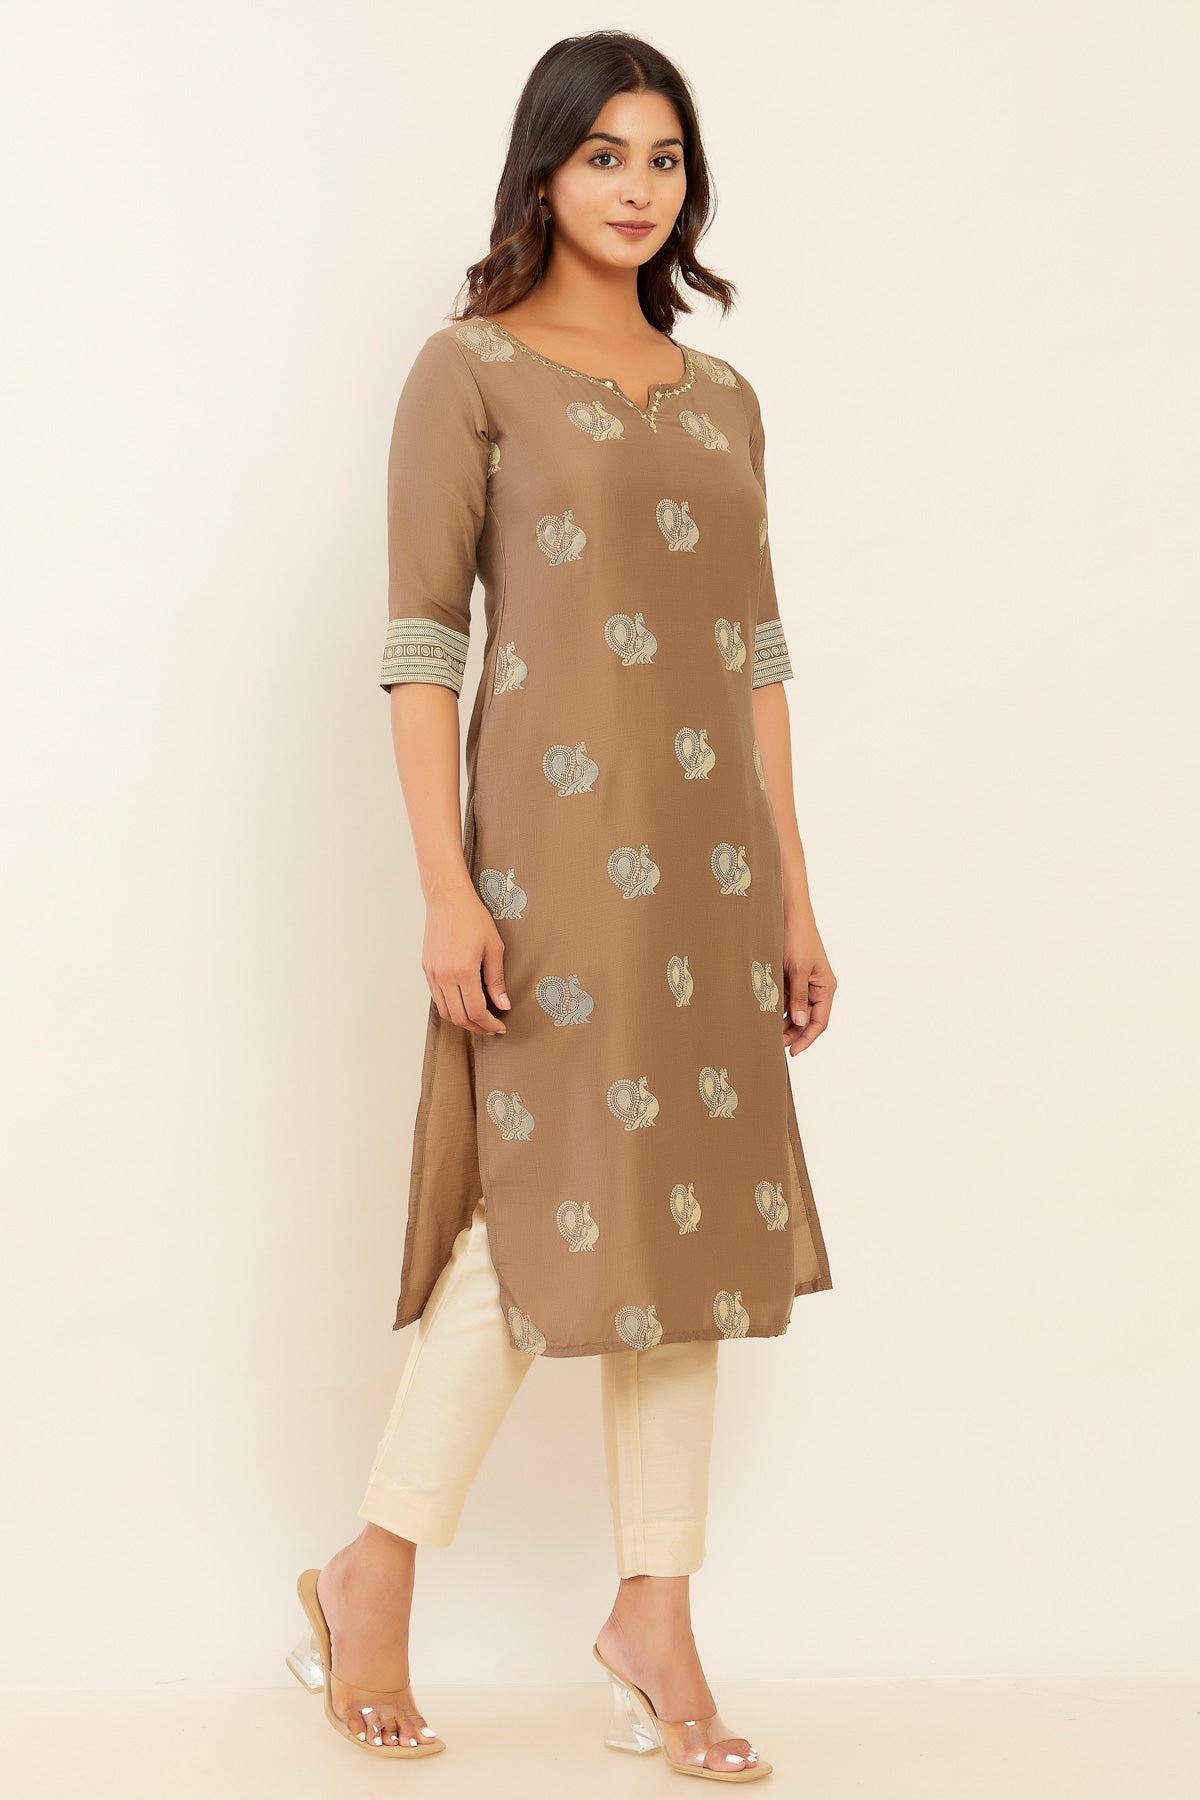 All Over Annam Printed With Embellished Foil Mirror Work Neckline Kurta Brown